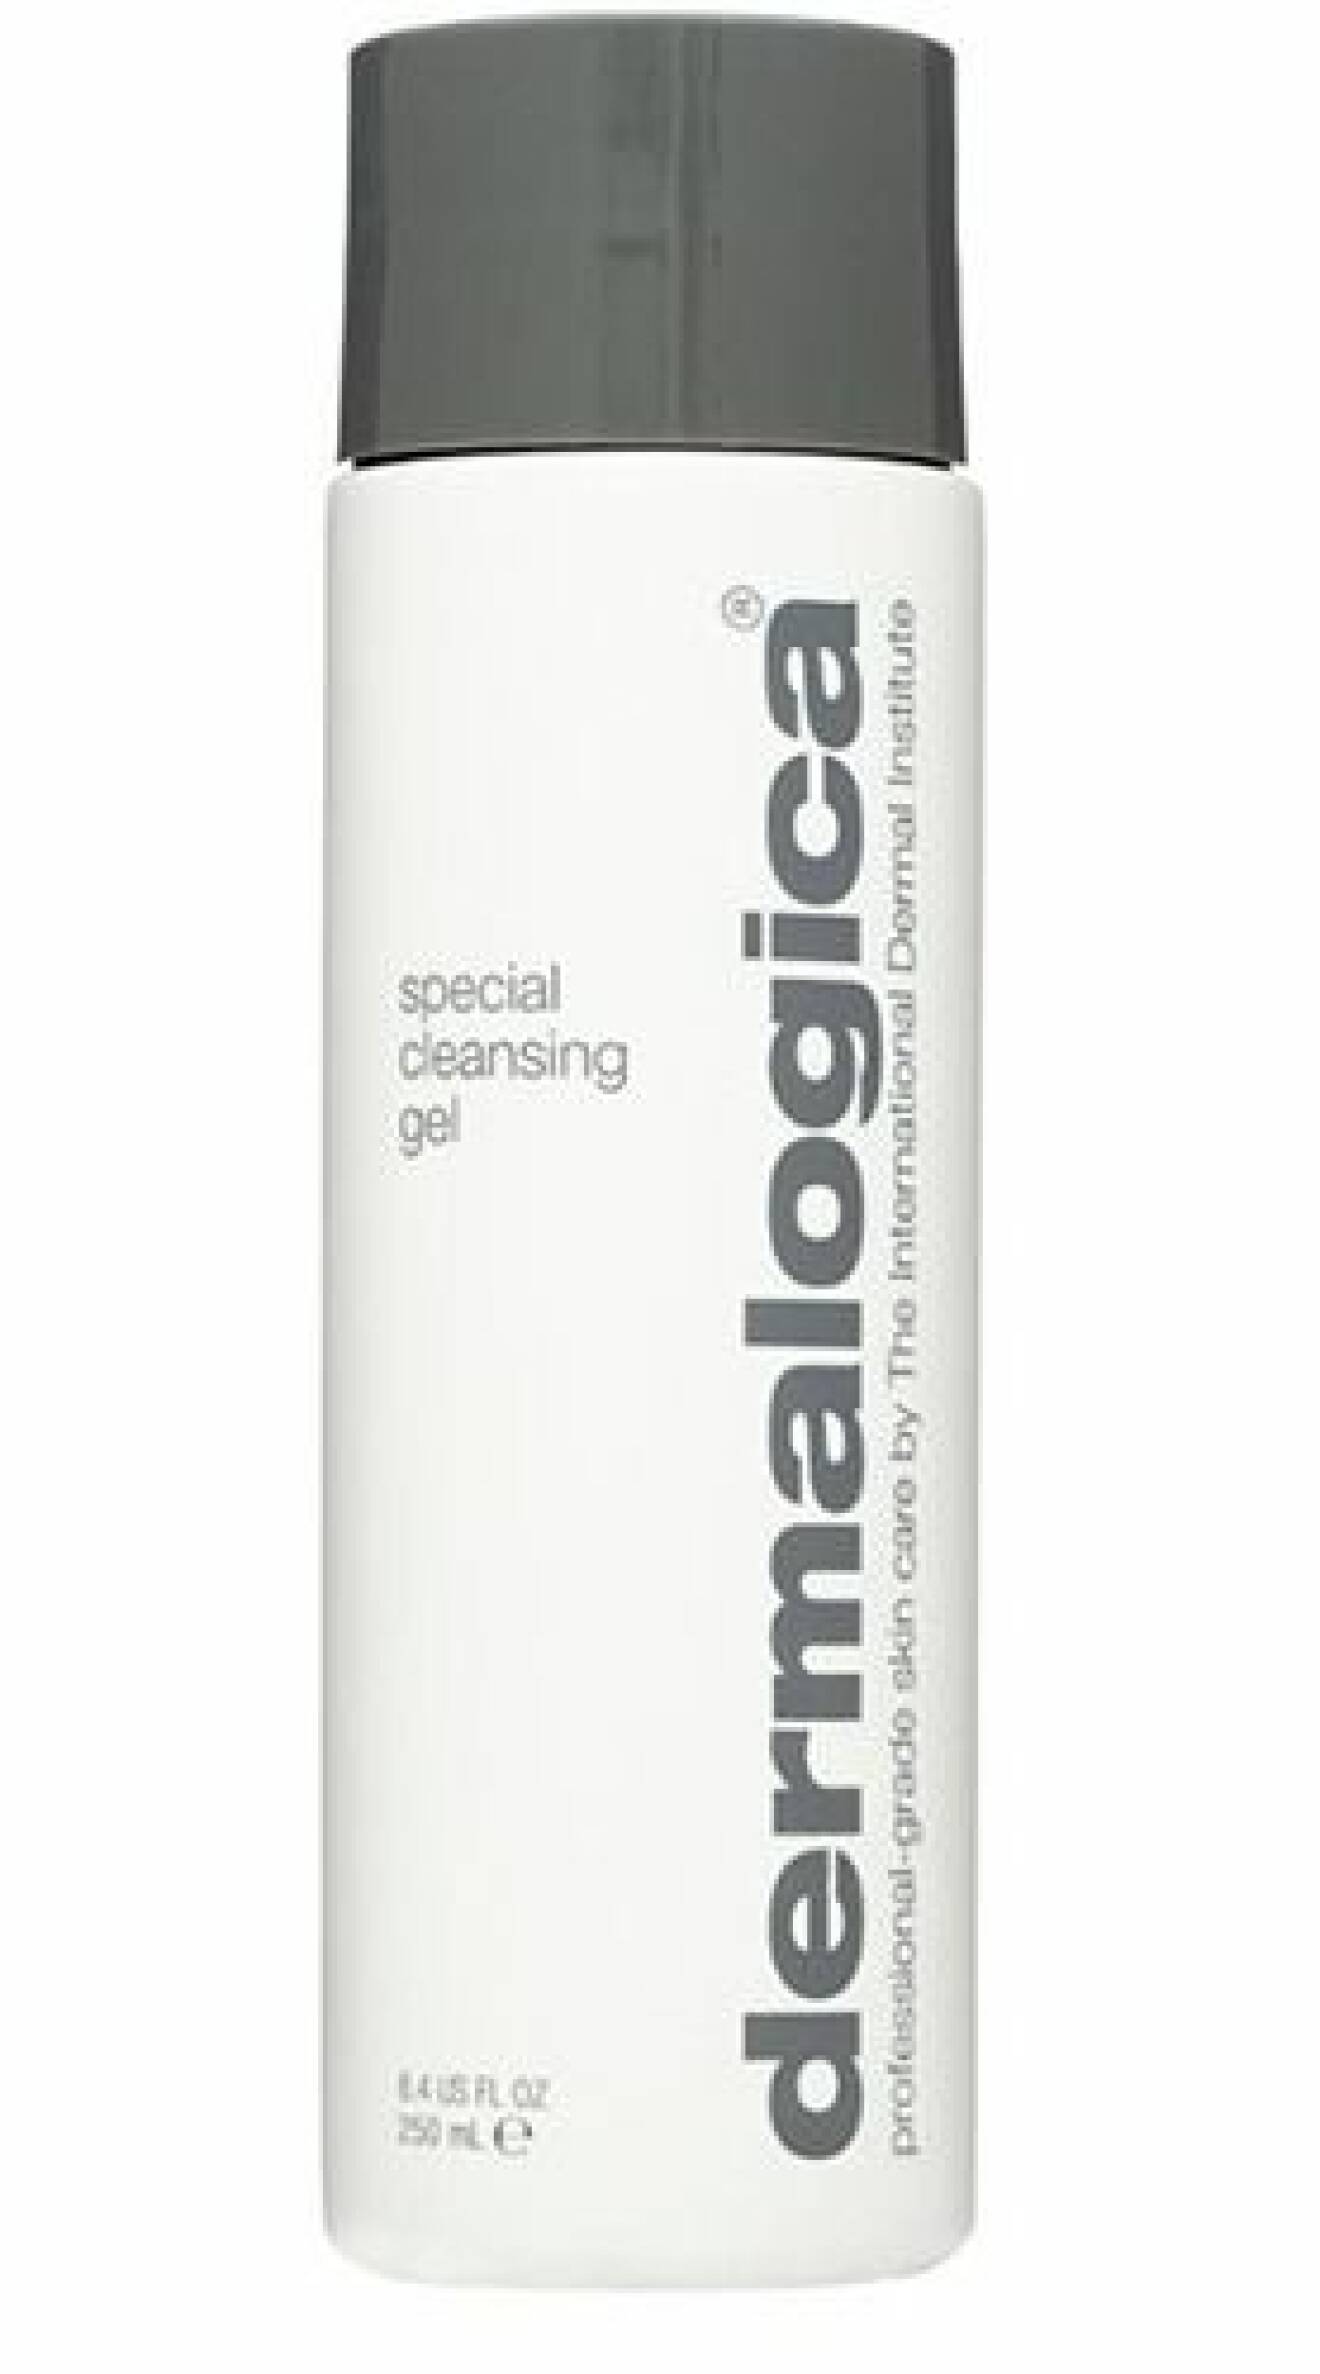 dermalogica special cleansing